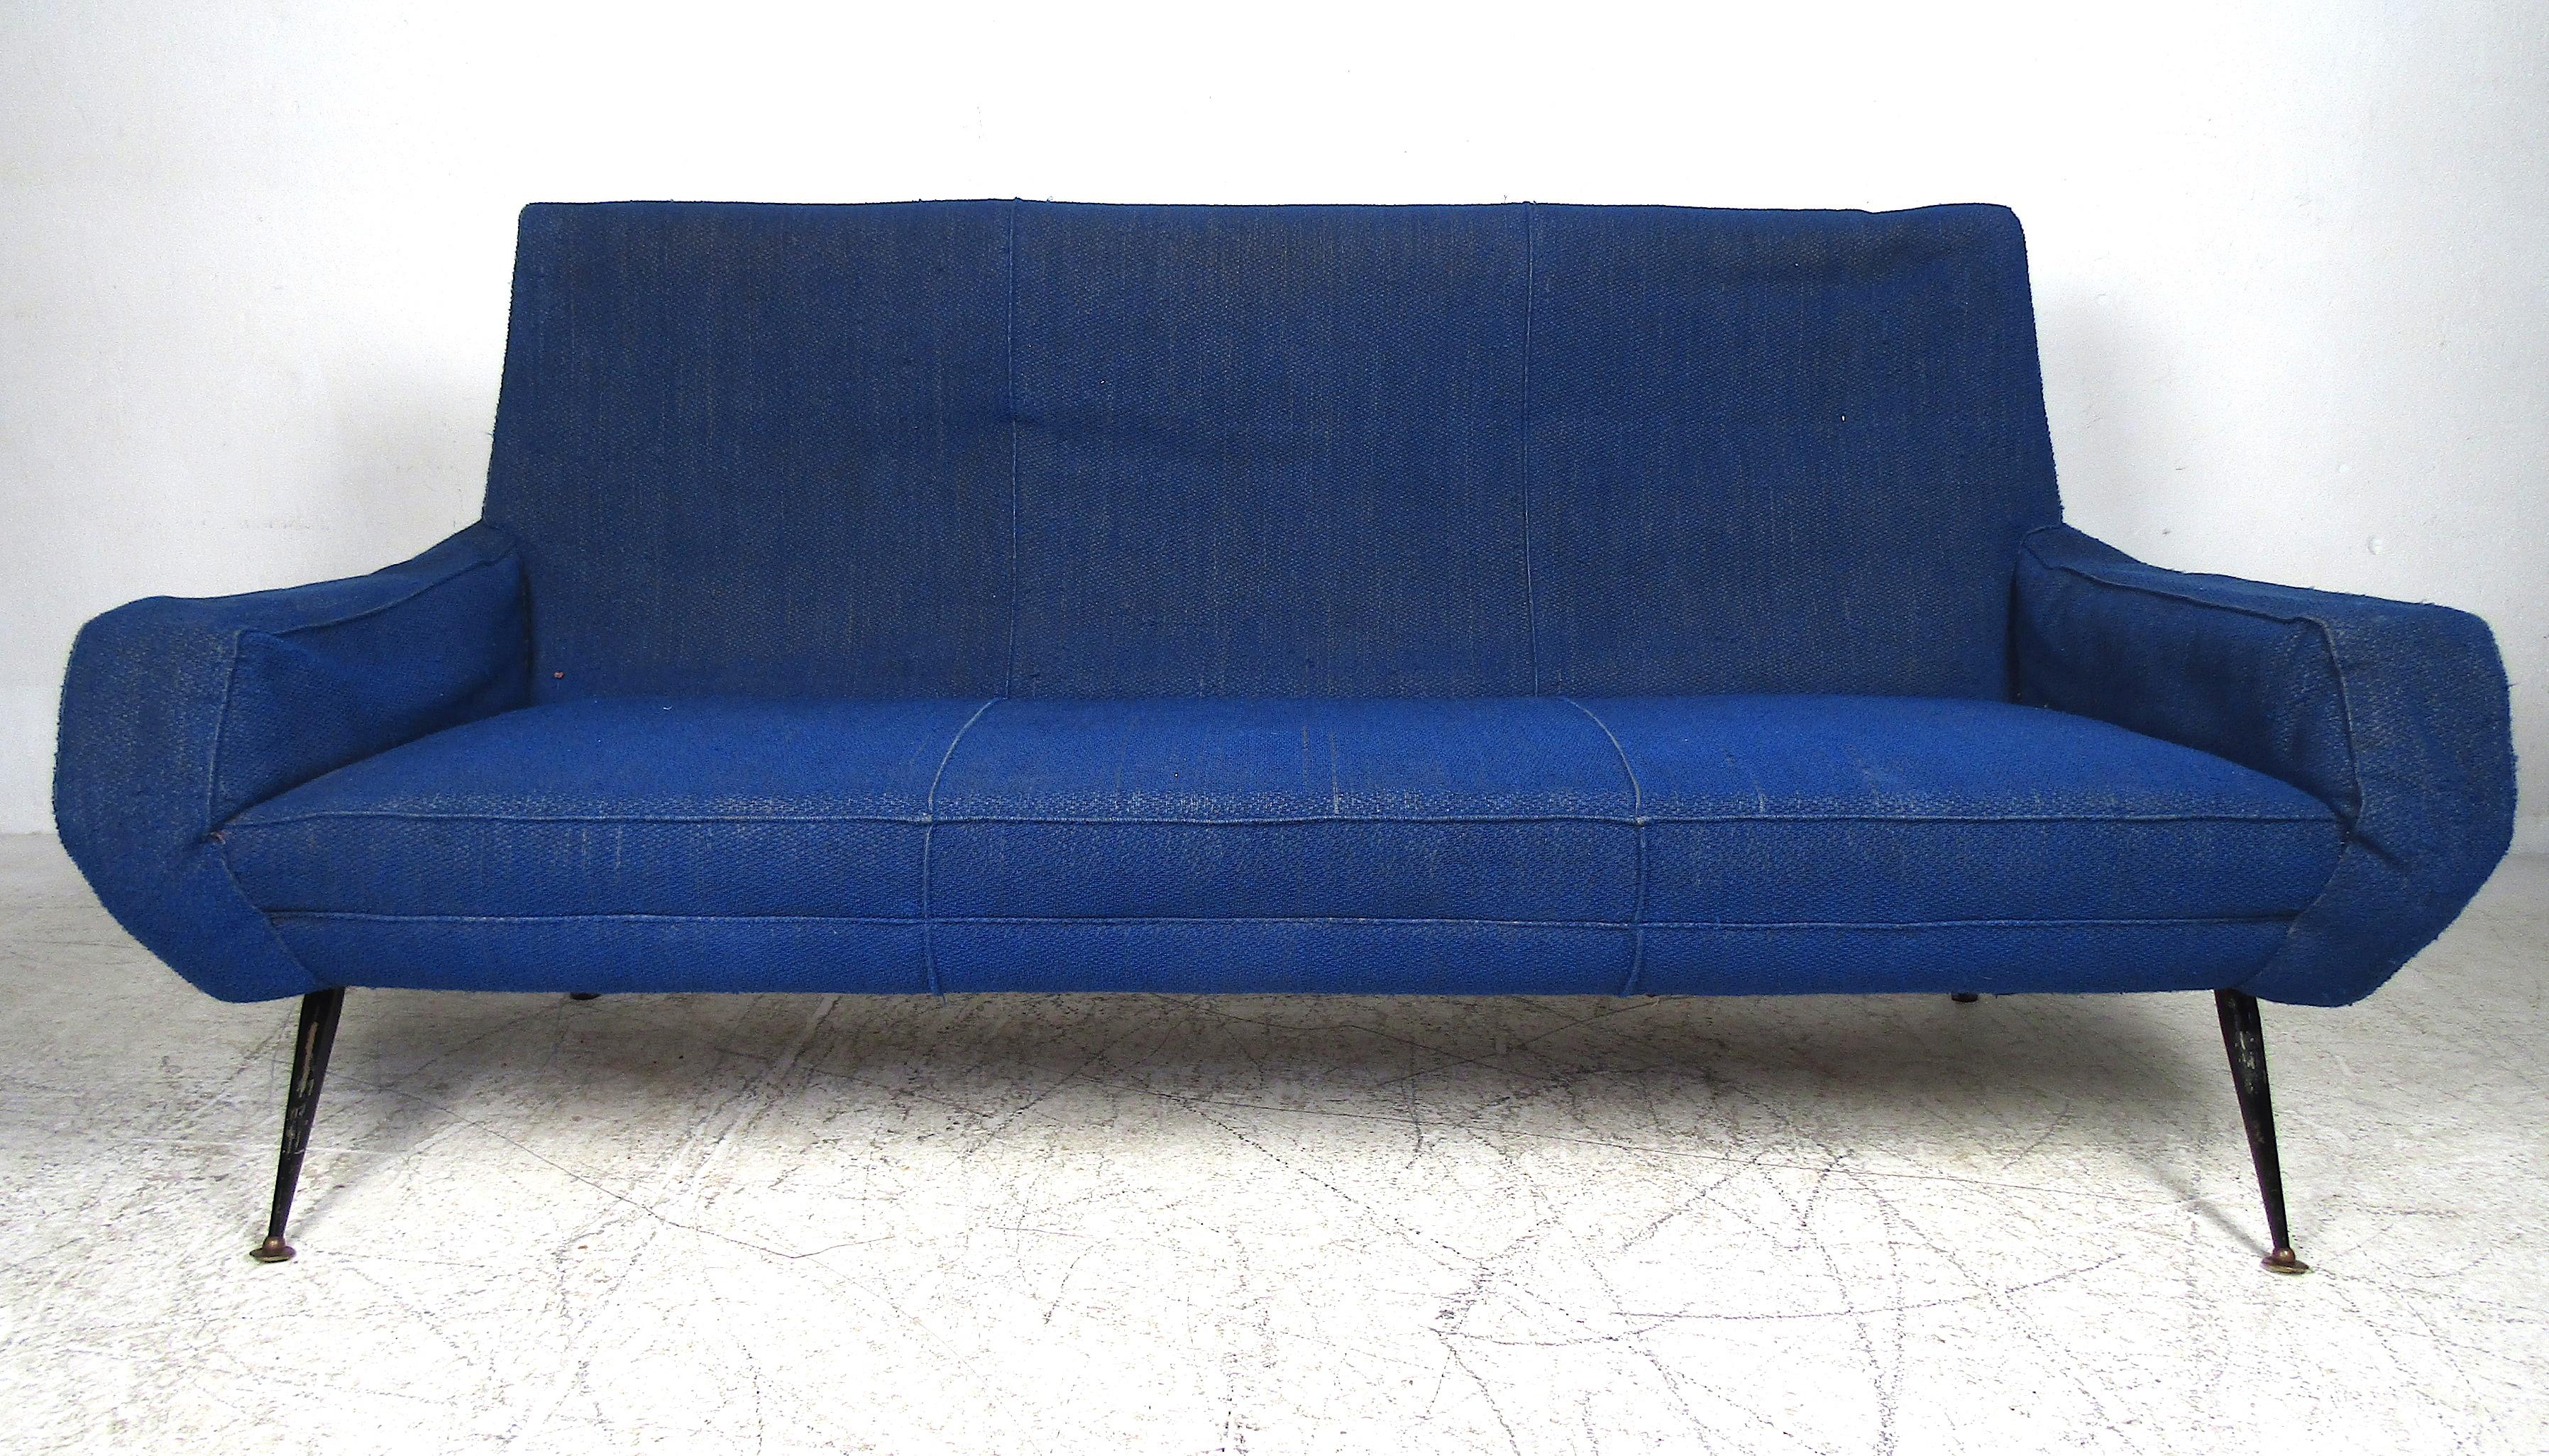 This beautiful Italian sofa features sculpted armrests as well as splayed metal legs. The royal blue upholstery covers thick padded seating, ensuring maximum comfort. This unique piece would make a wonderful addition to any seating arrangement.